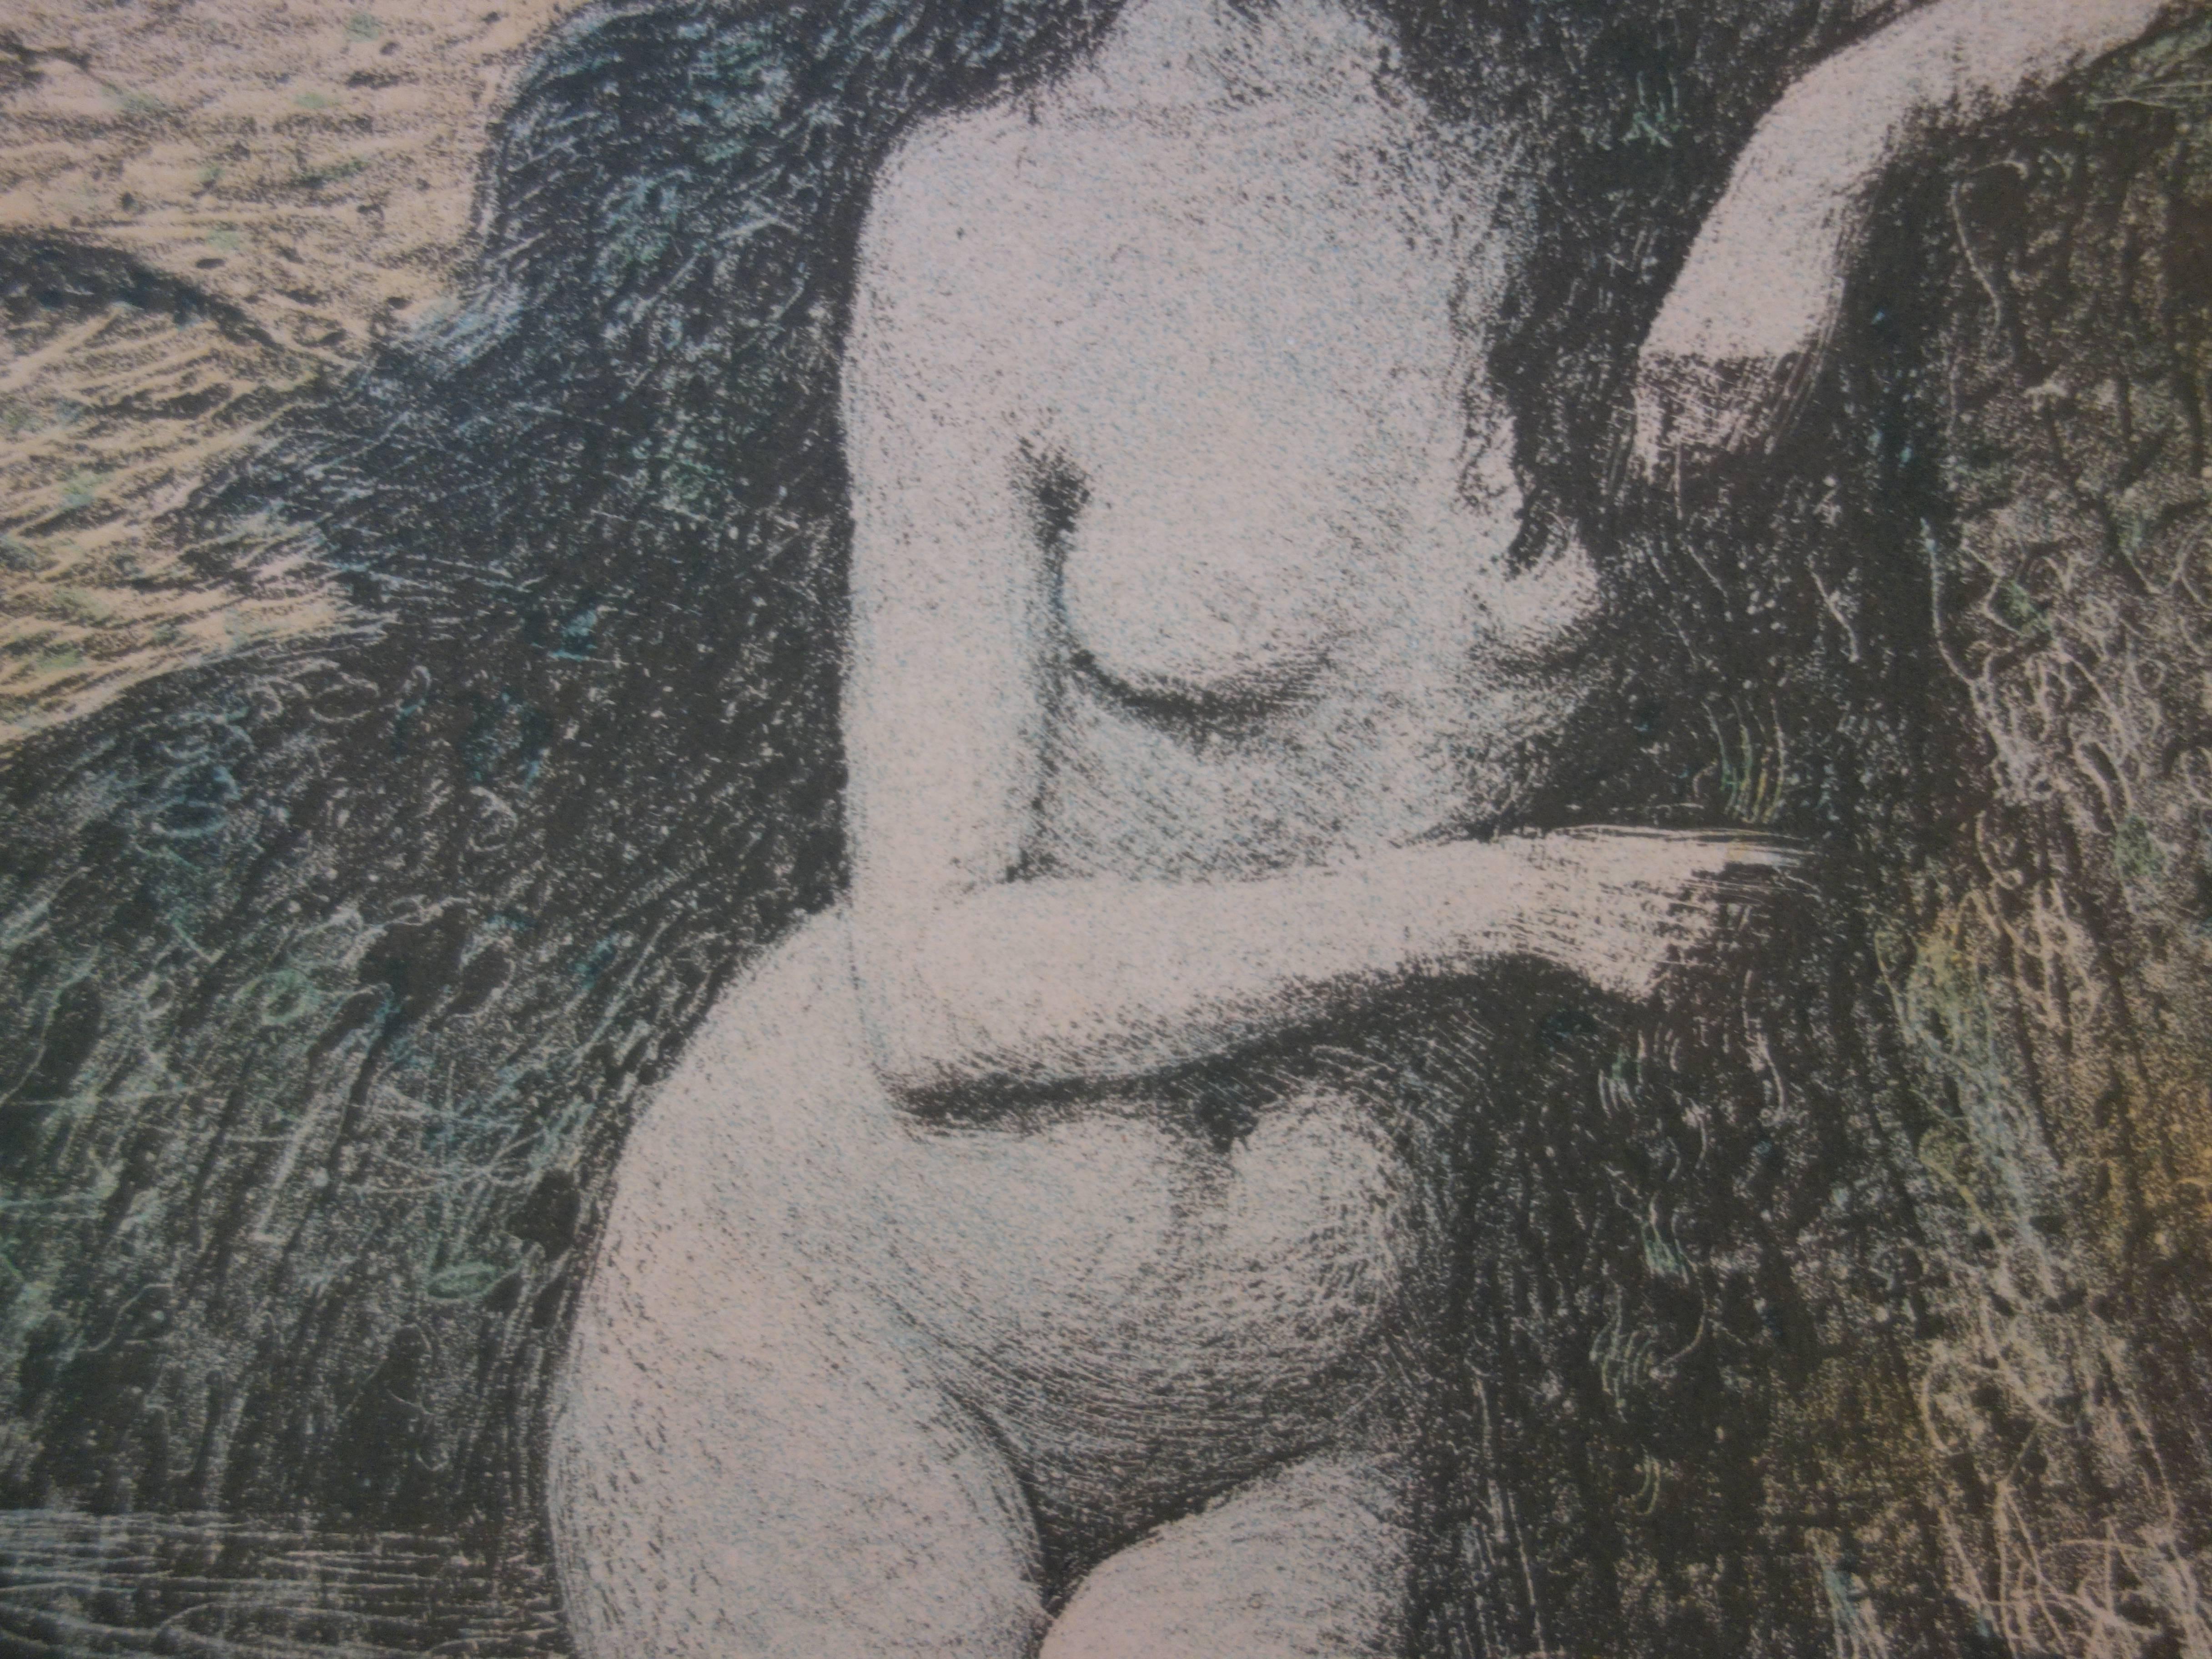 Charles GUERIN
Mermaid

Original lithograph
Plate signed
1897/98
Printed on paper Vélin 
Size 40 x 31 cm (c. 16 x 12